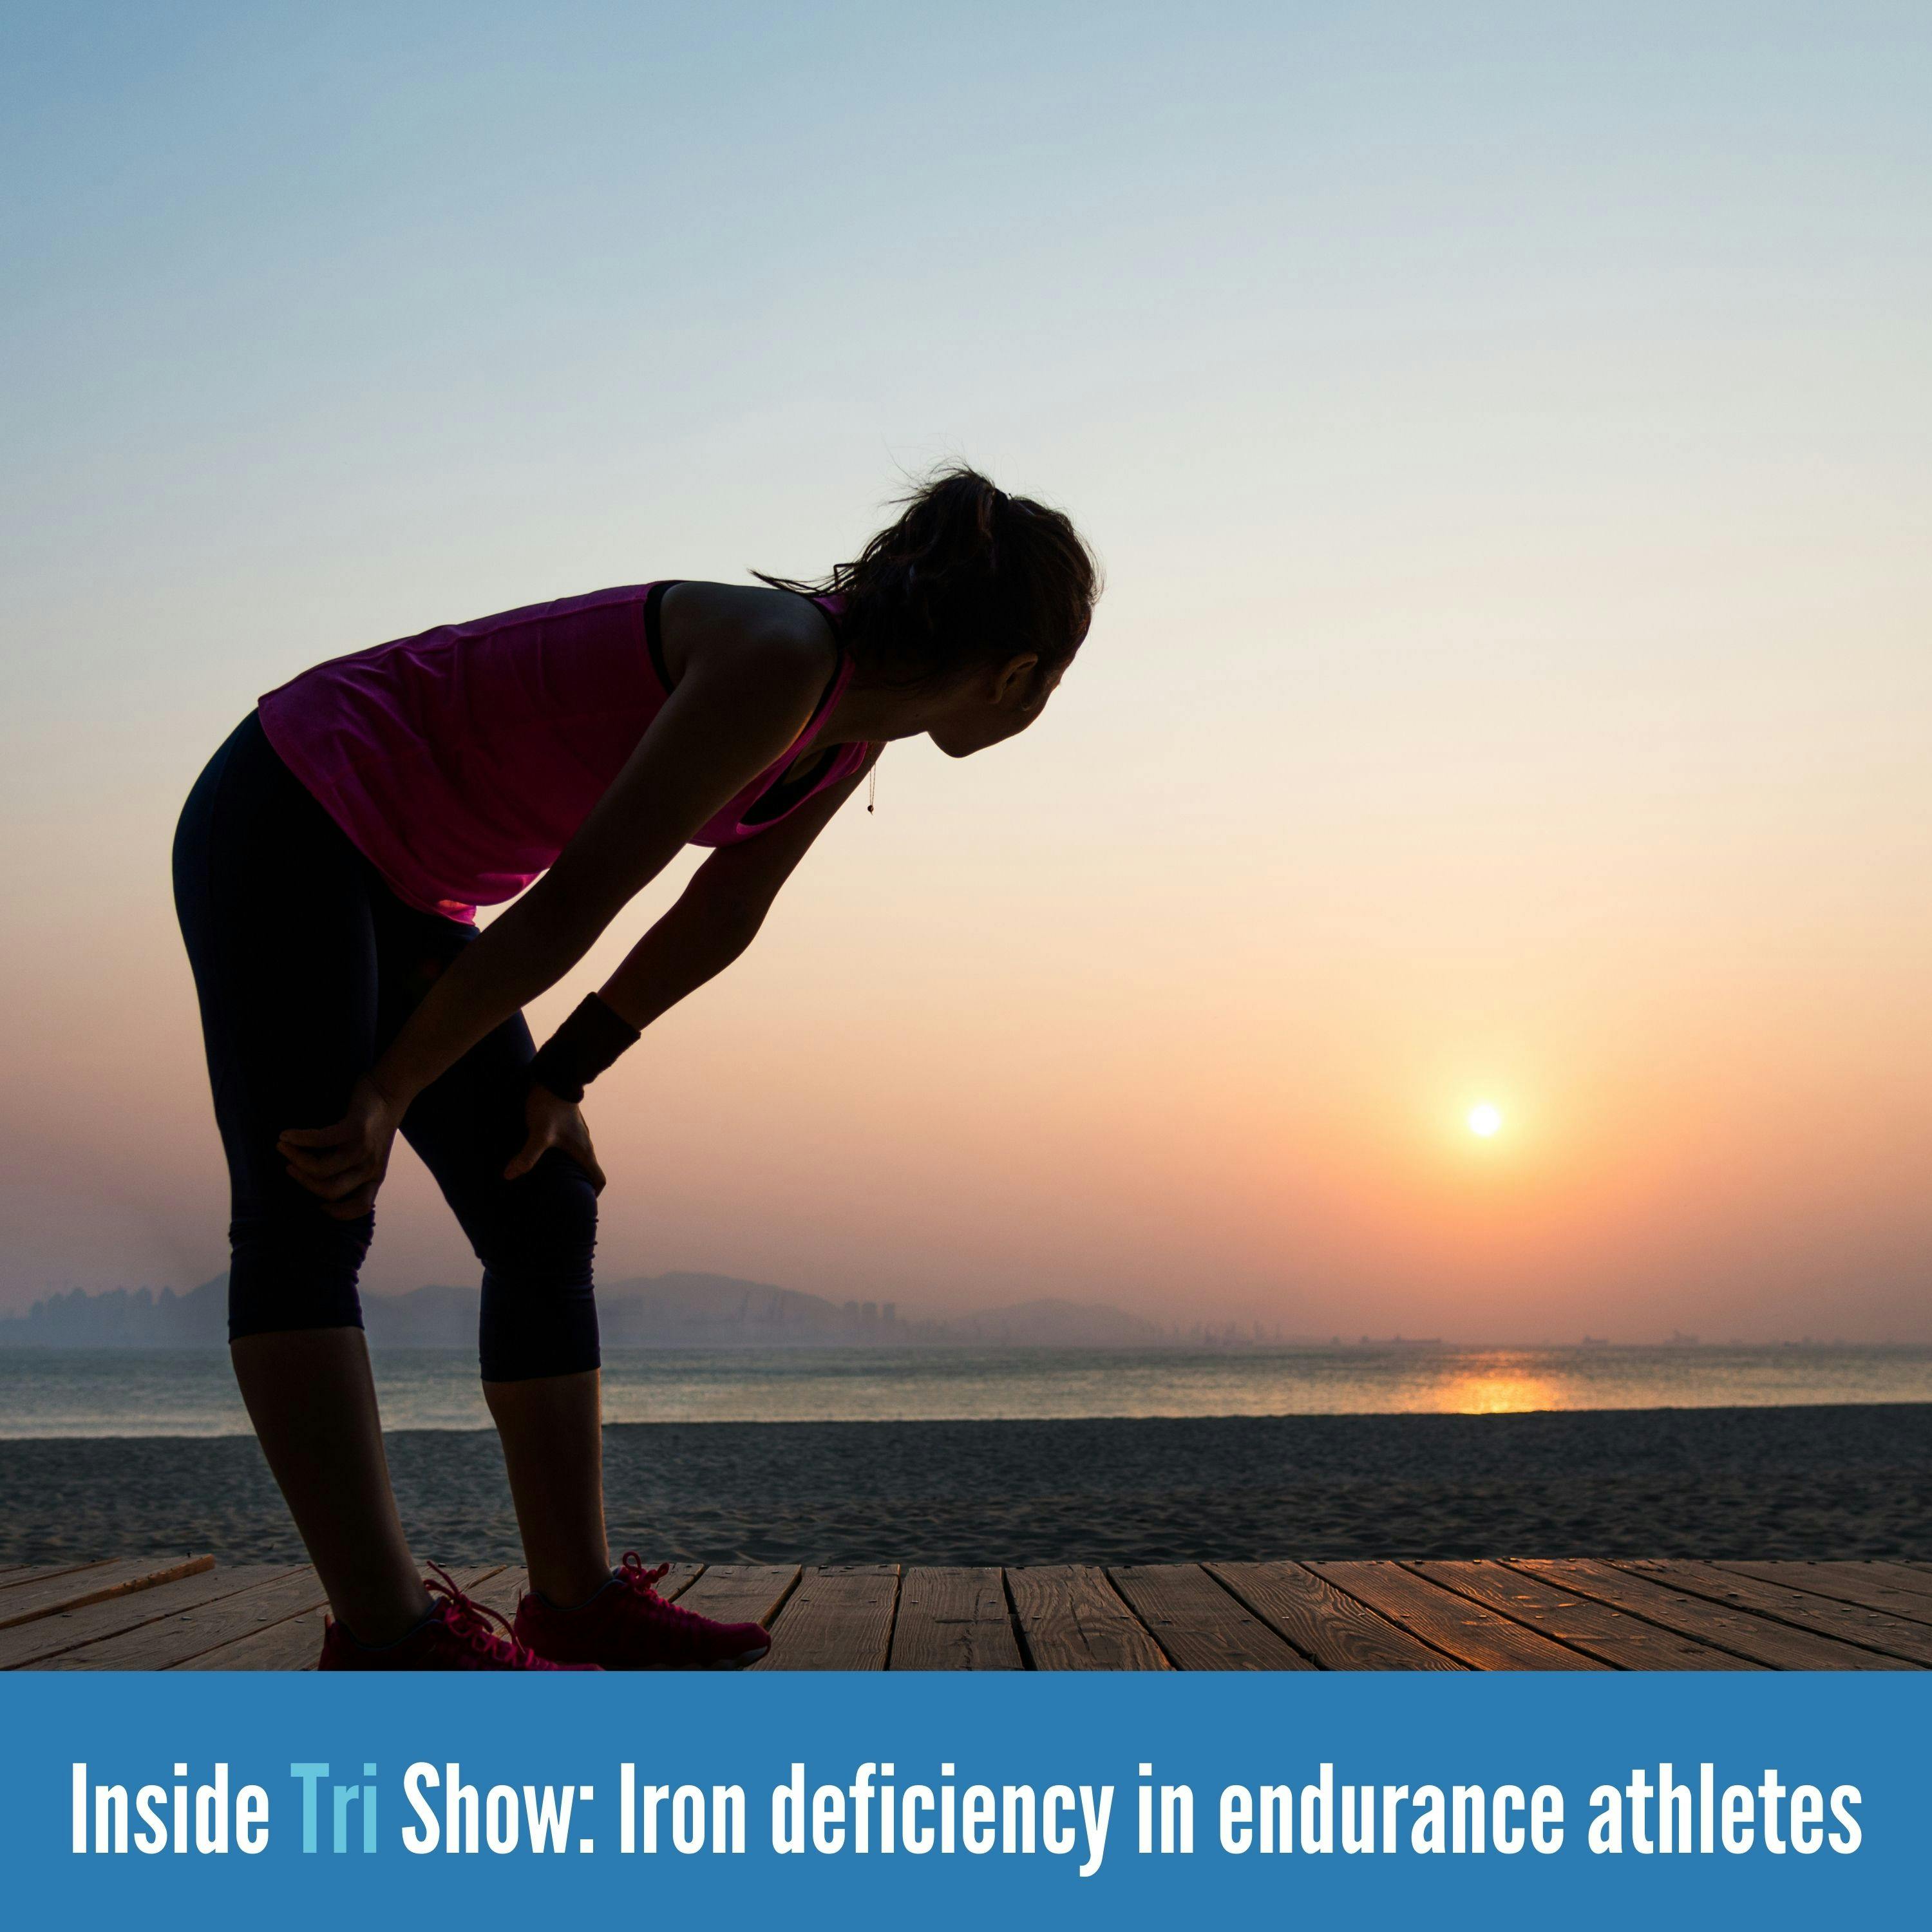 Endurance athletes and iron deficiency anaemia with Dr Richard Burden